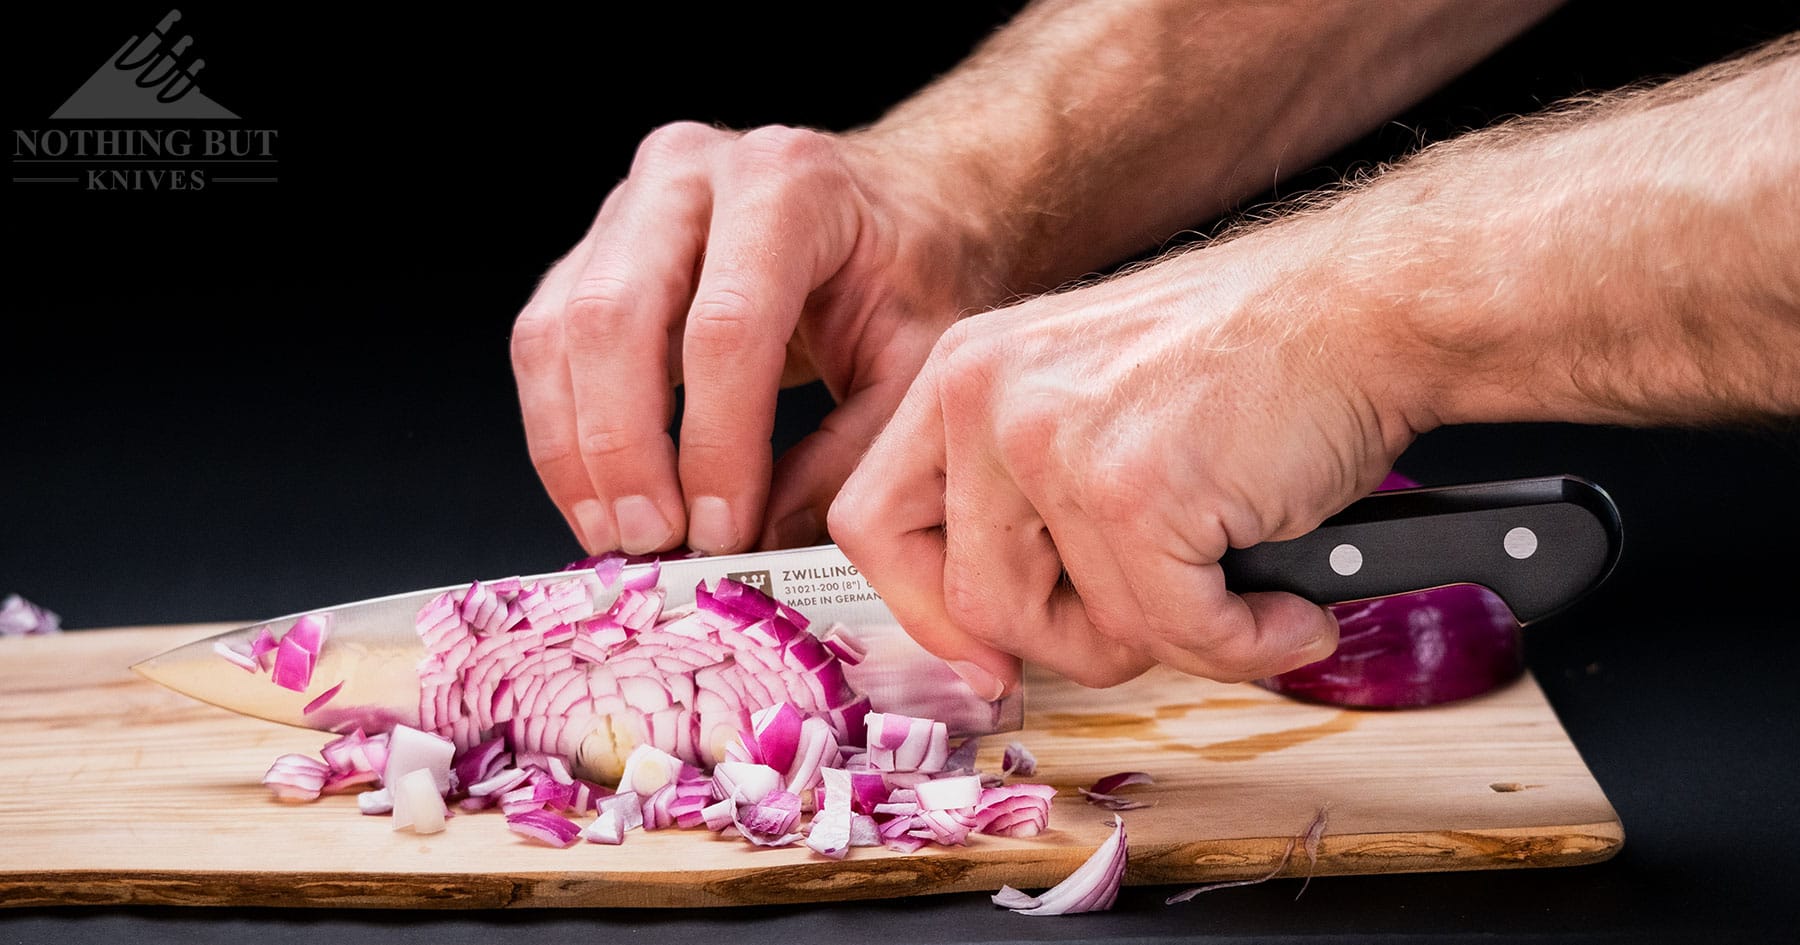 The Zwilling Professional S chef knife is a tough slicer, but it is a bit too heavy by modern standards.